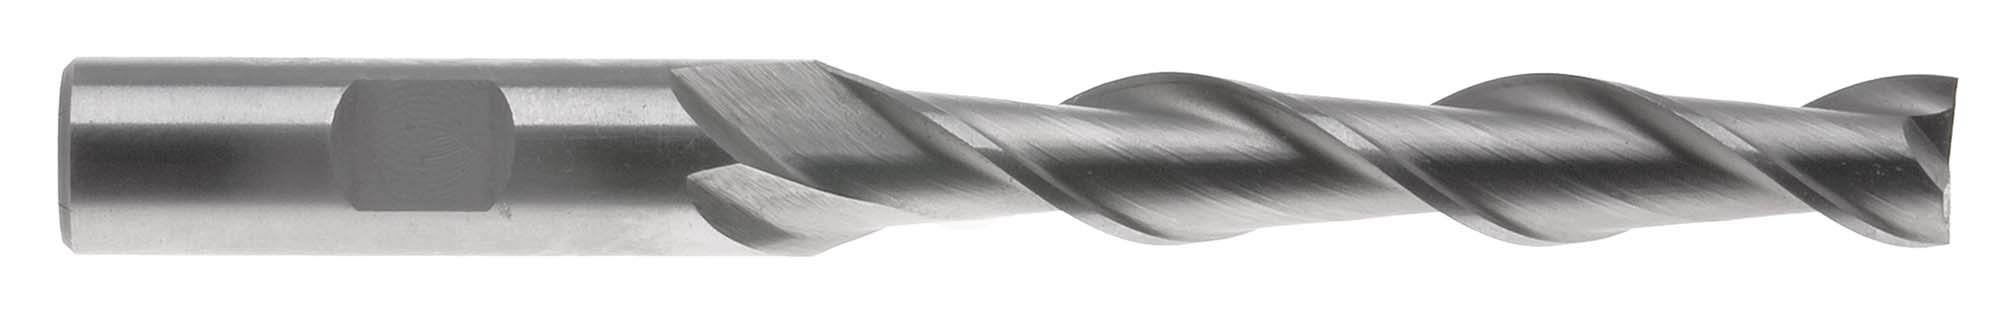 EM-AL10B  5/16"  Extra Long Aluminum Cutting 2 Flute End Mill with High Helix Flutes, 3/8" shank, High Speed Steel